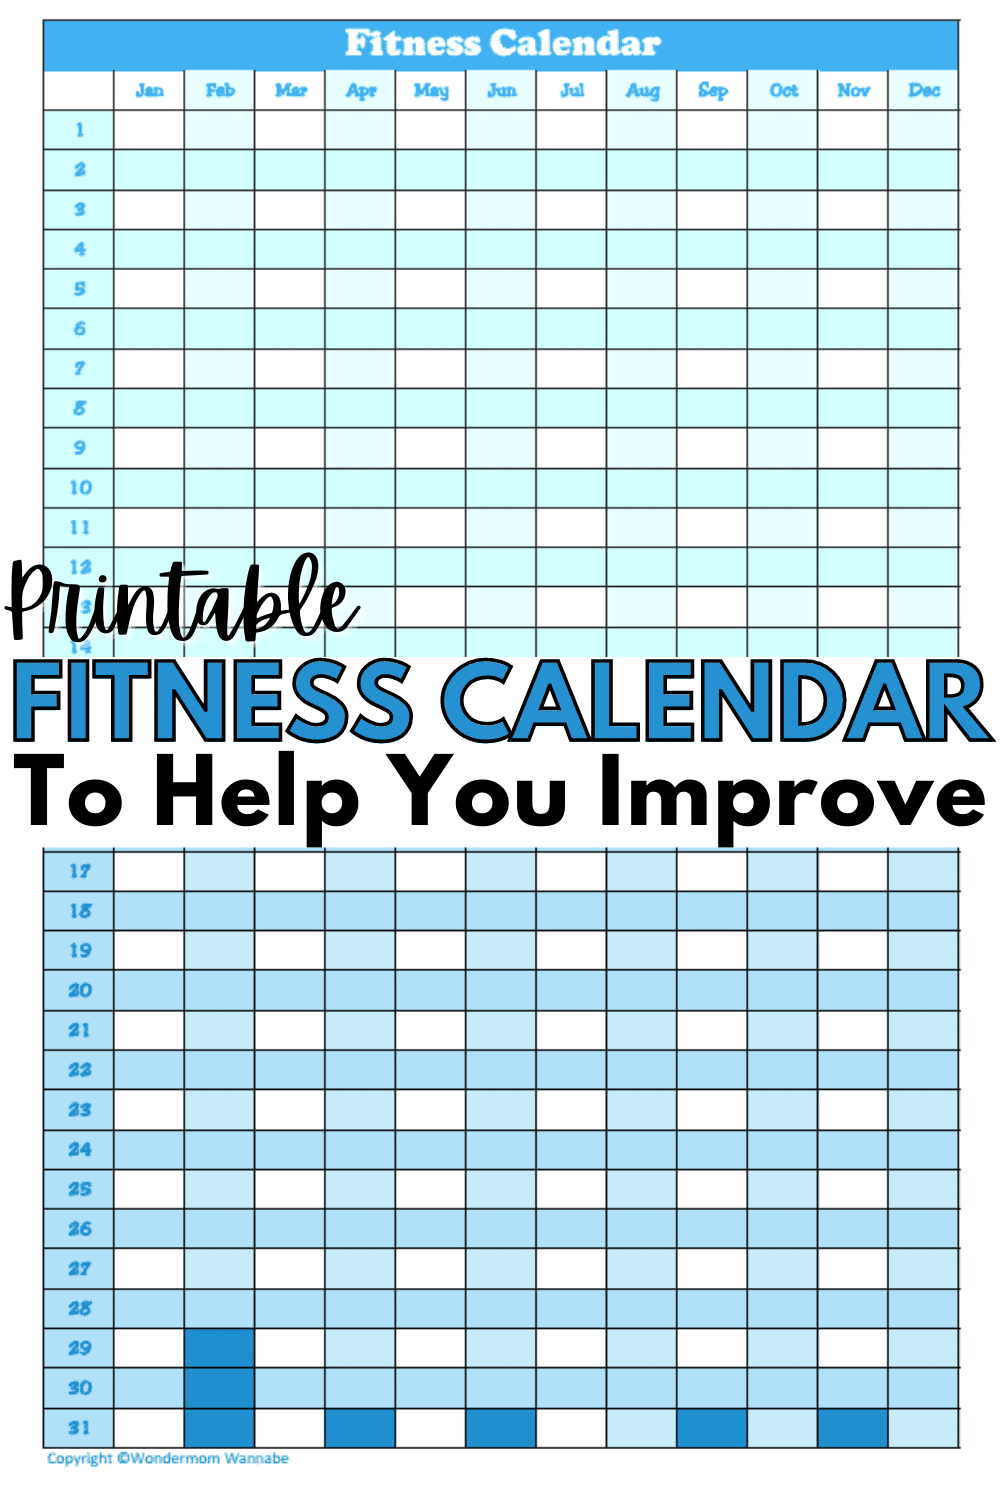 If you have resolved to improve your fitness this year, you don’t have to fall into the category of February quitters. Use this chart to stay on track. #fitness #fitnessmotivation #printable via @wondermomwannab